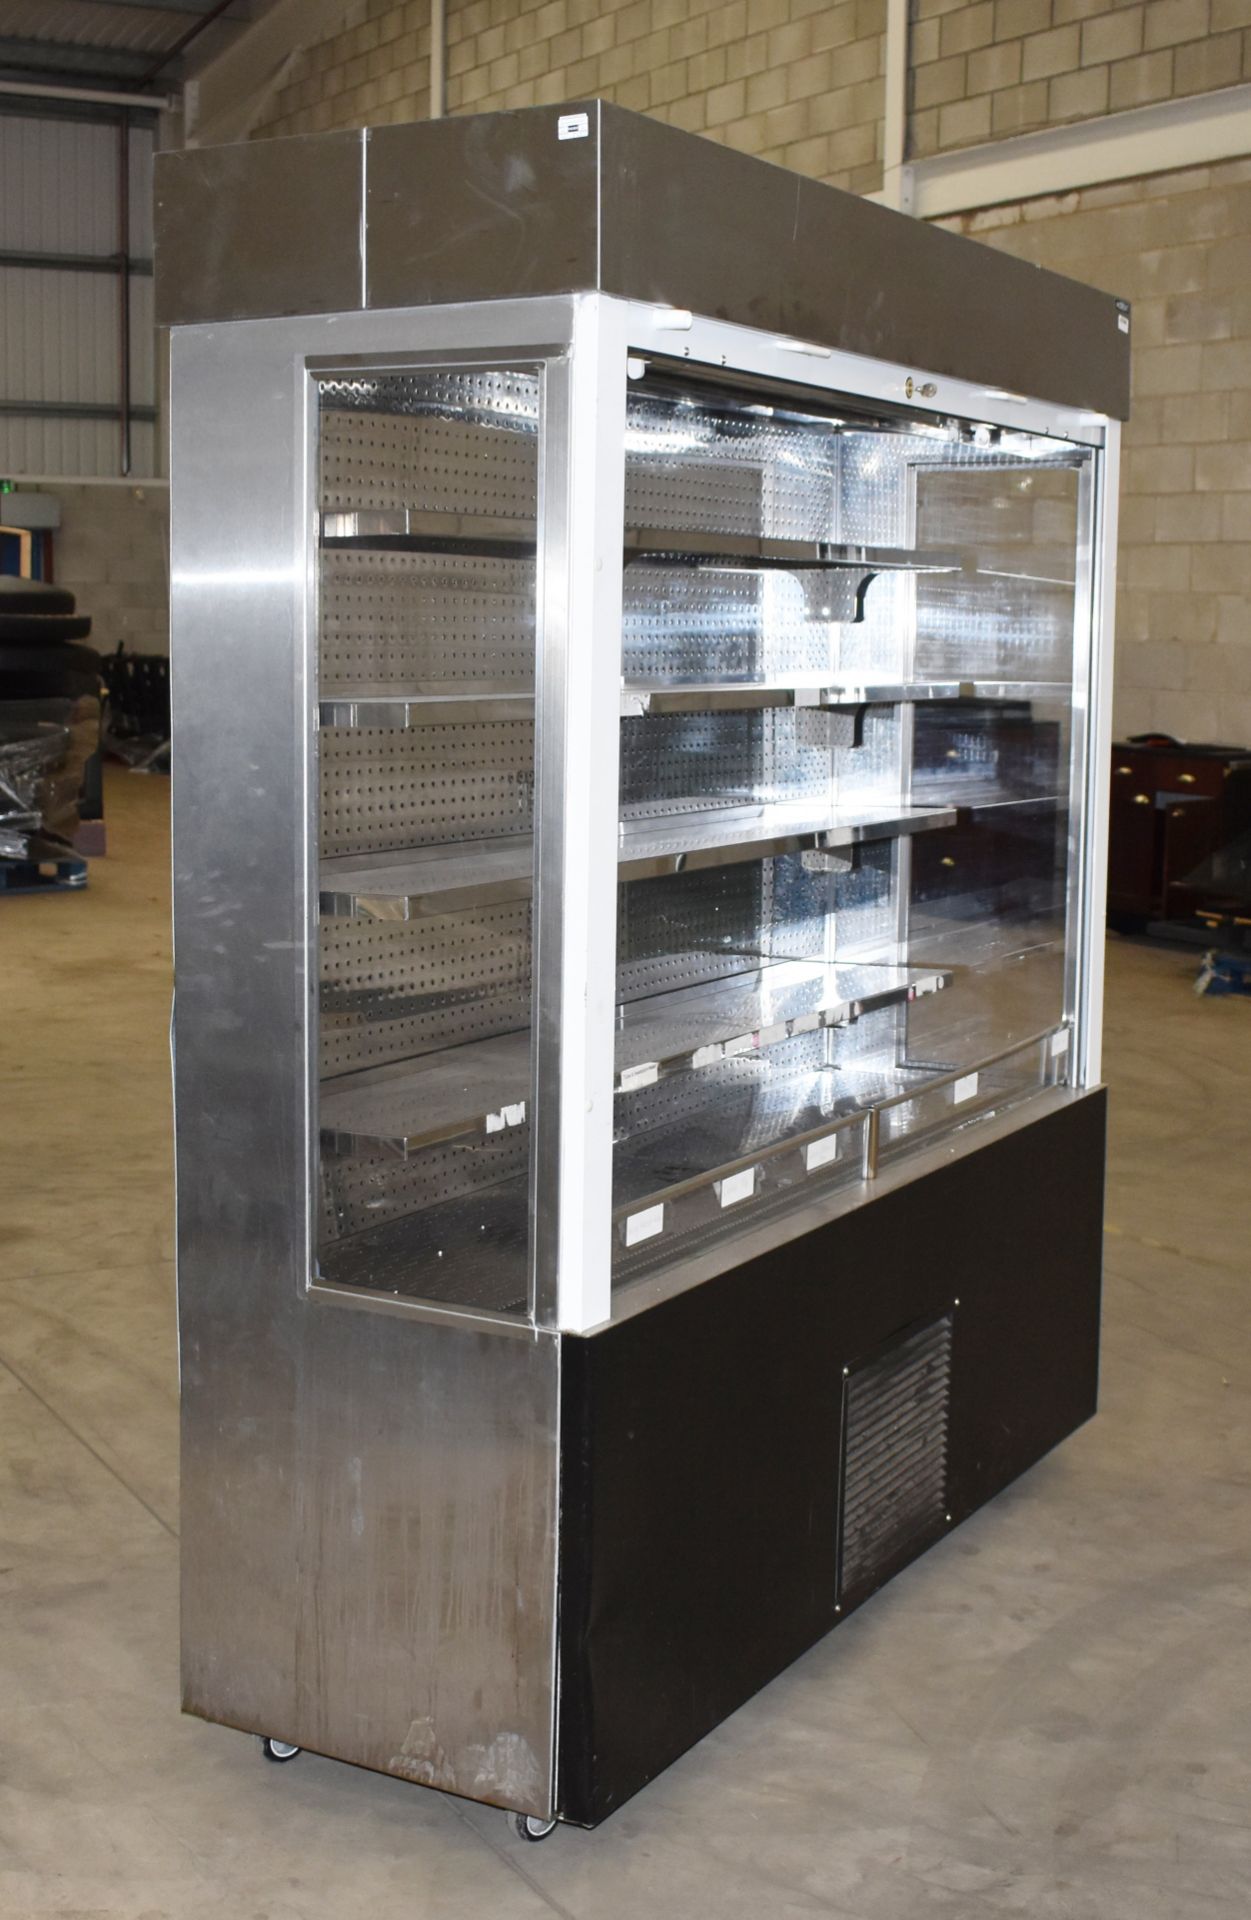 1 x Moffat Chilled Merchandiser With Lockable Roller Shutter - Includes Key - Model MM18LSA - - Image 2 of 8